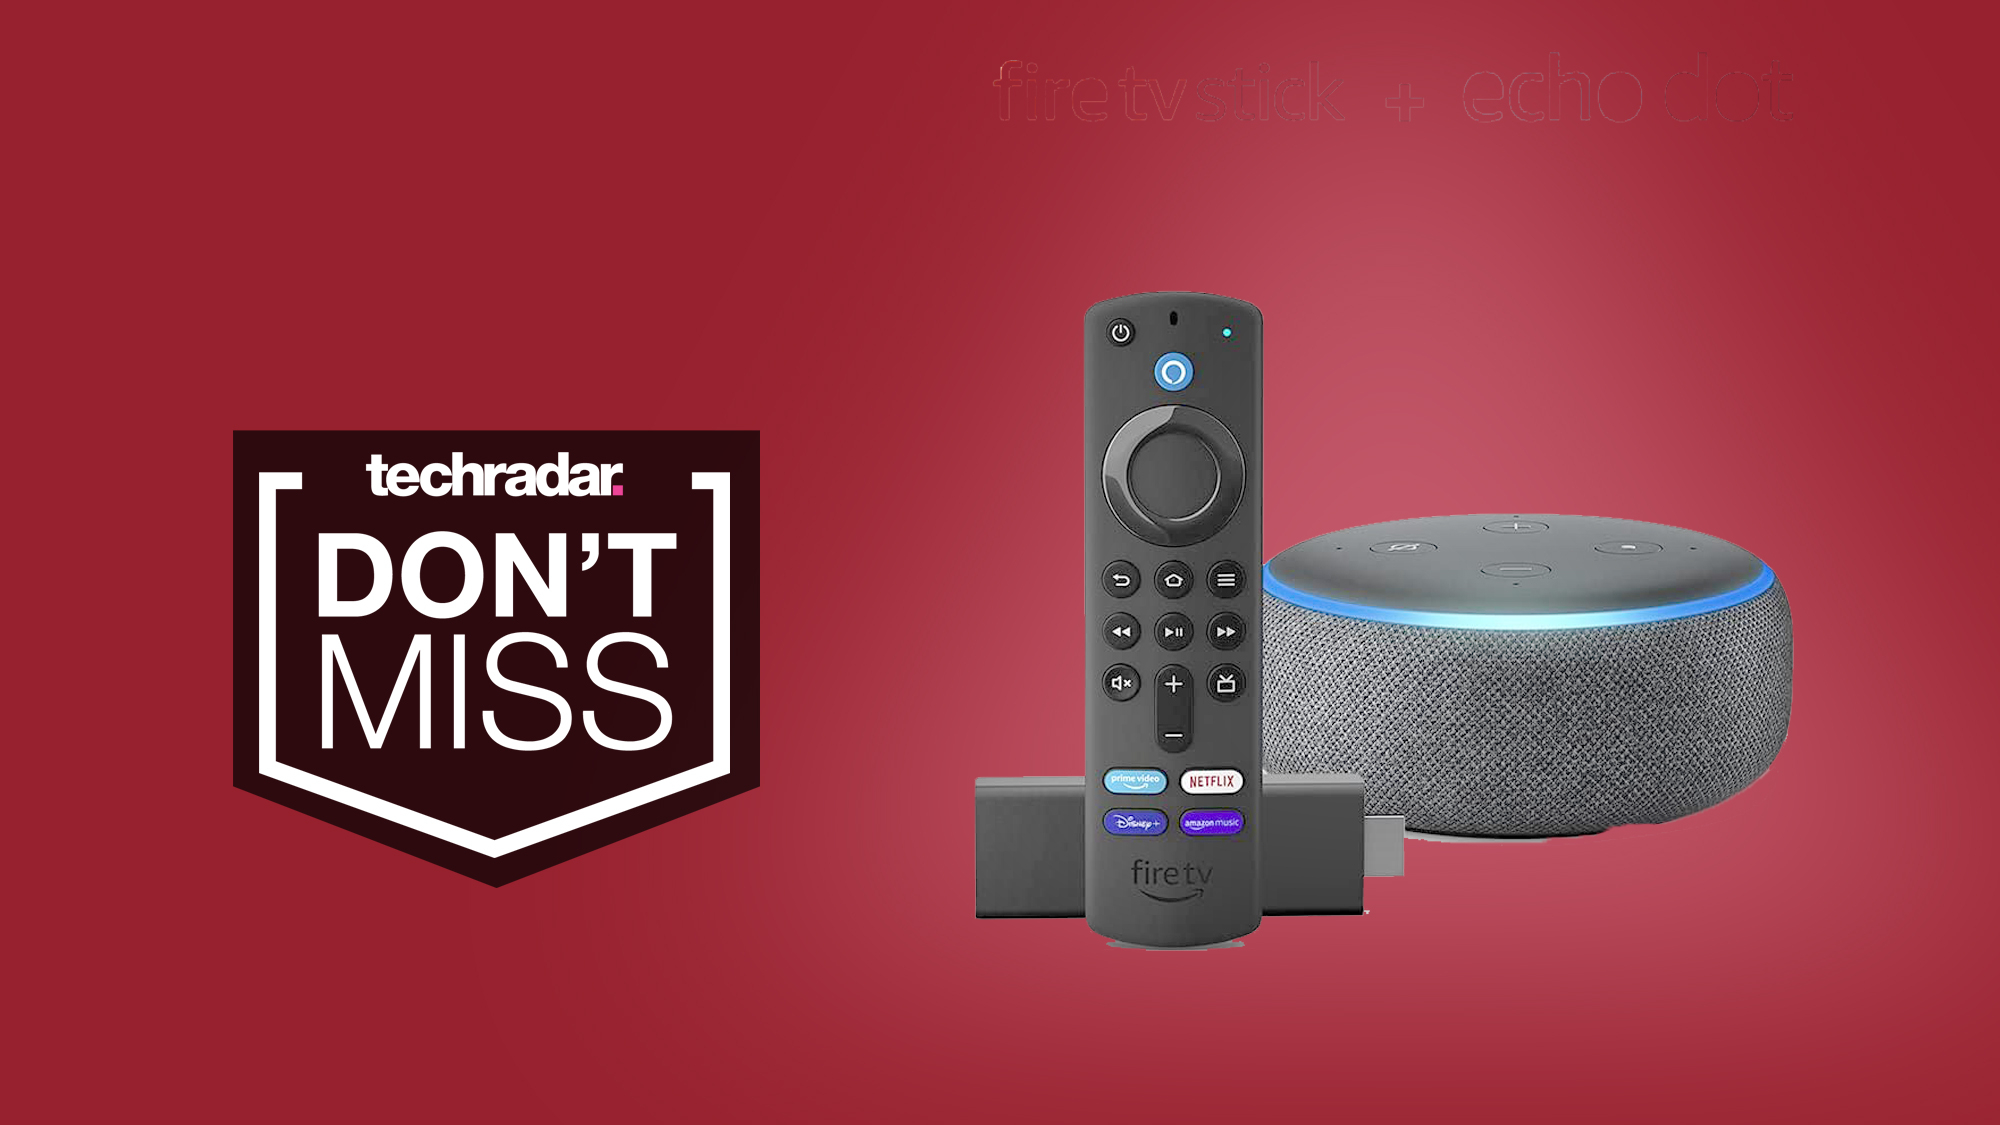 This Amazon Black Friday deal bundles in a Fire TV Stick and Echo Dot - Will The Echo Plus Have A Black Friday Deal